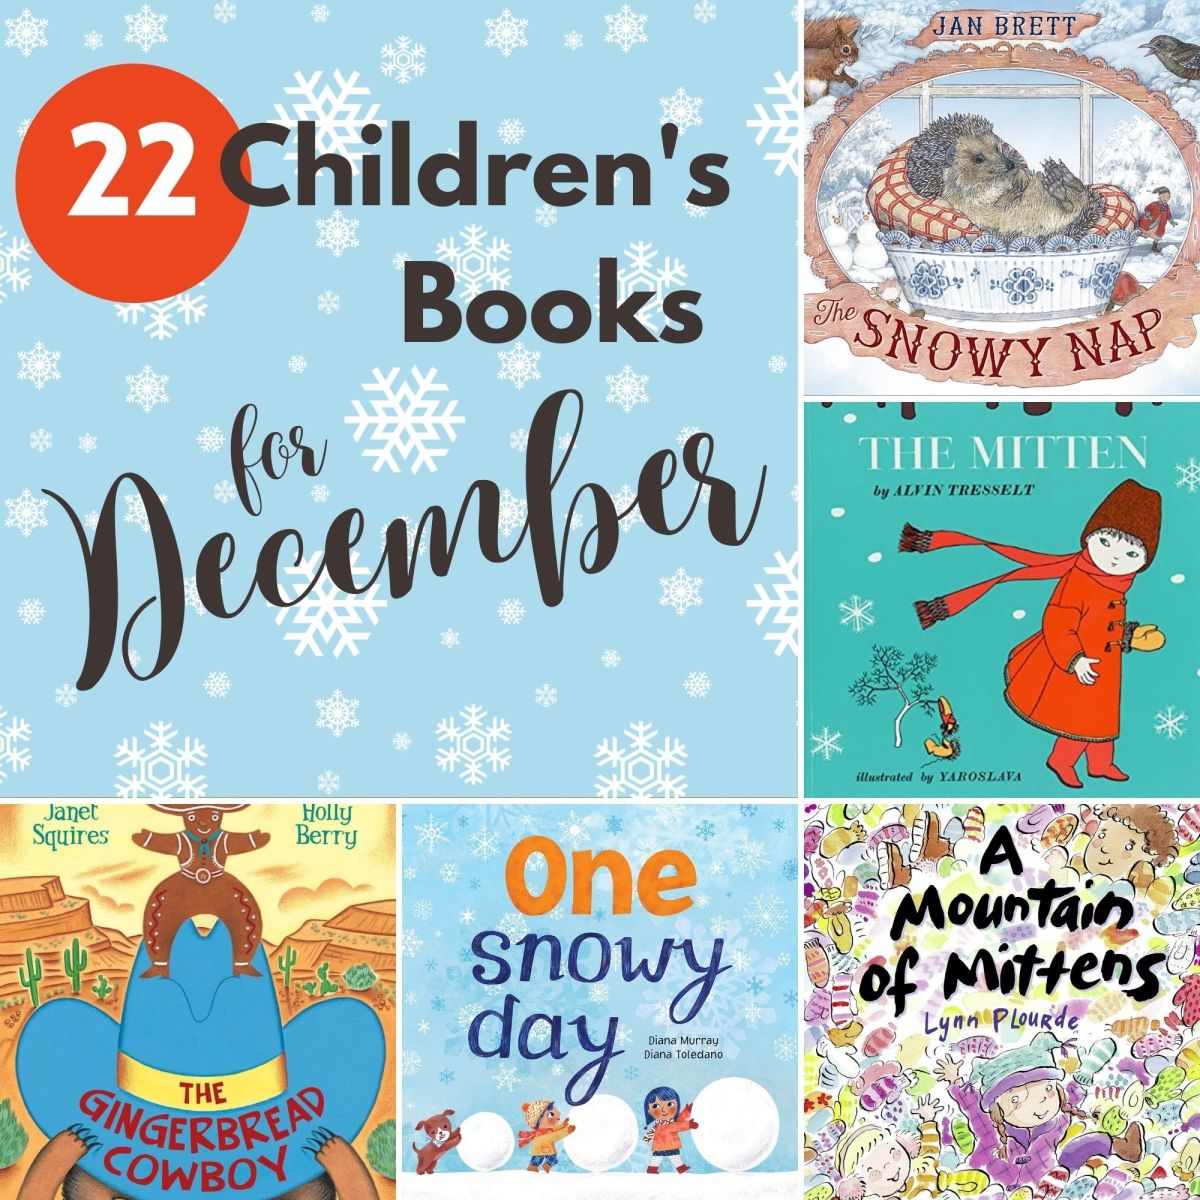 22 Children's Picture Books for Winter Holiday Storytime